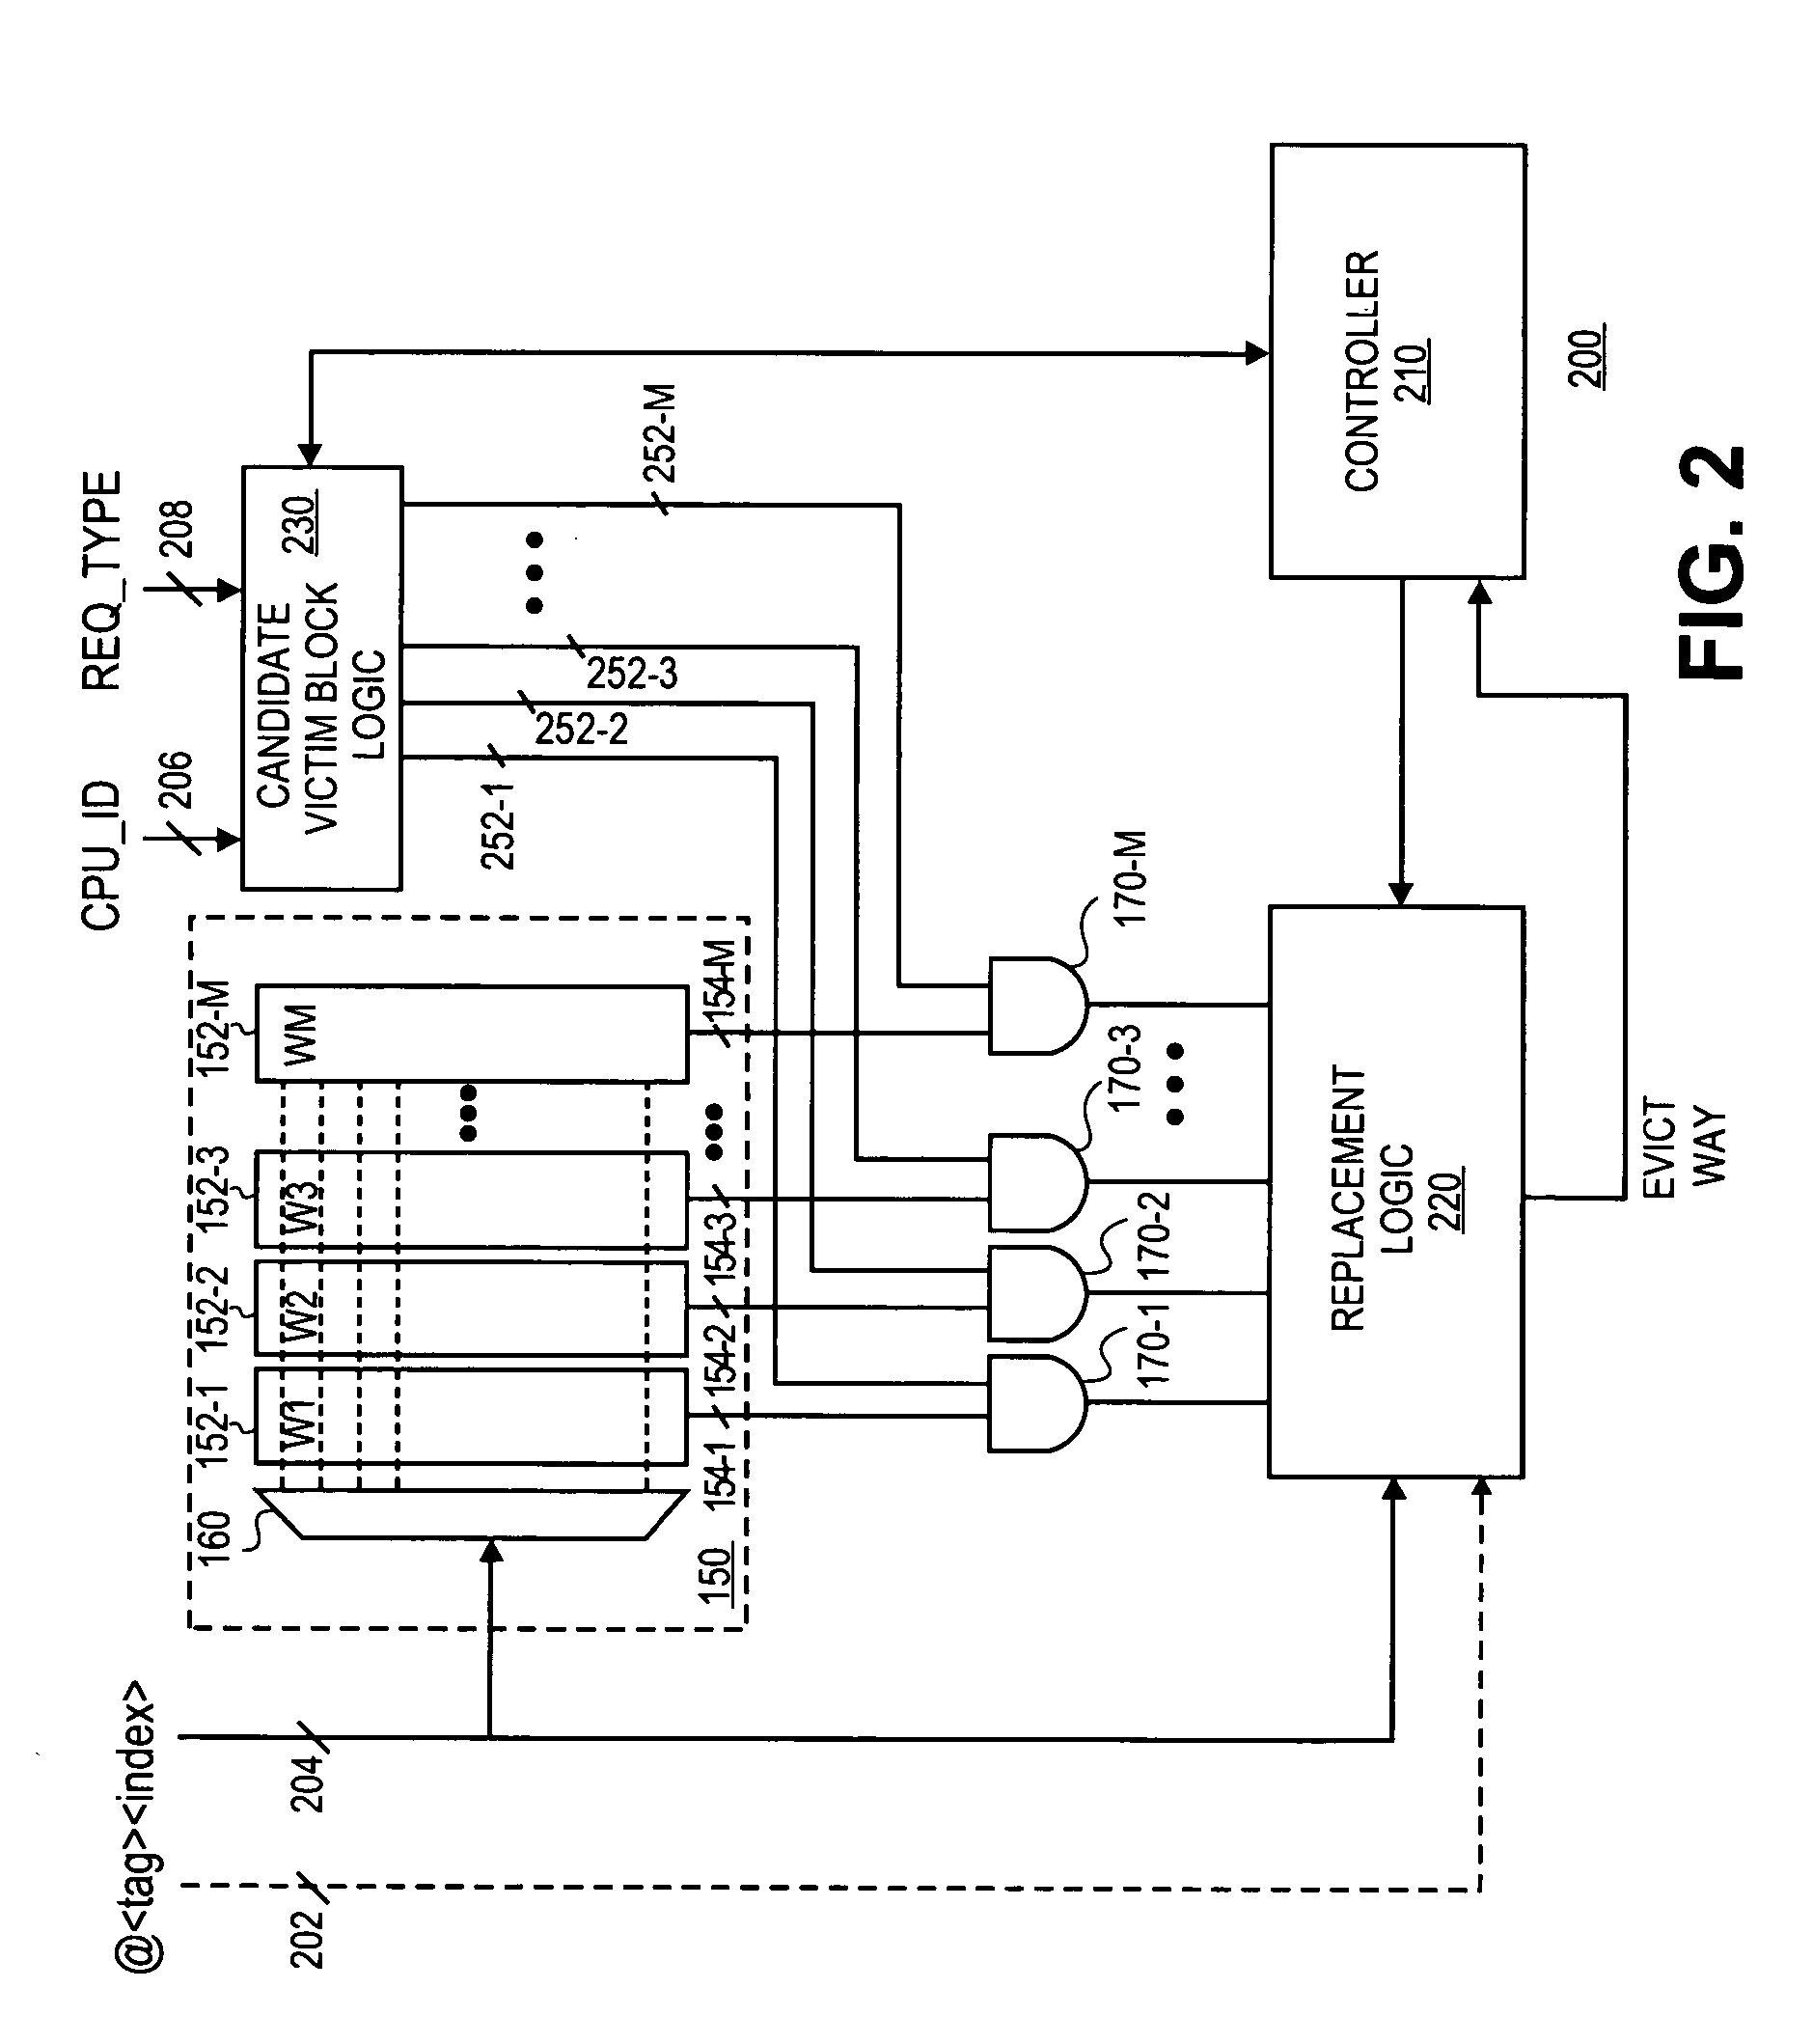 Apparatus and method for partitioning a shared cache of a chip multi-processor